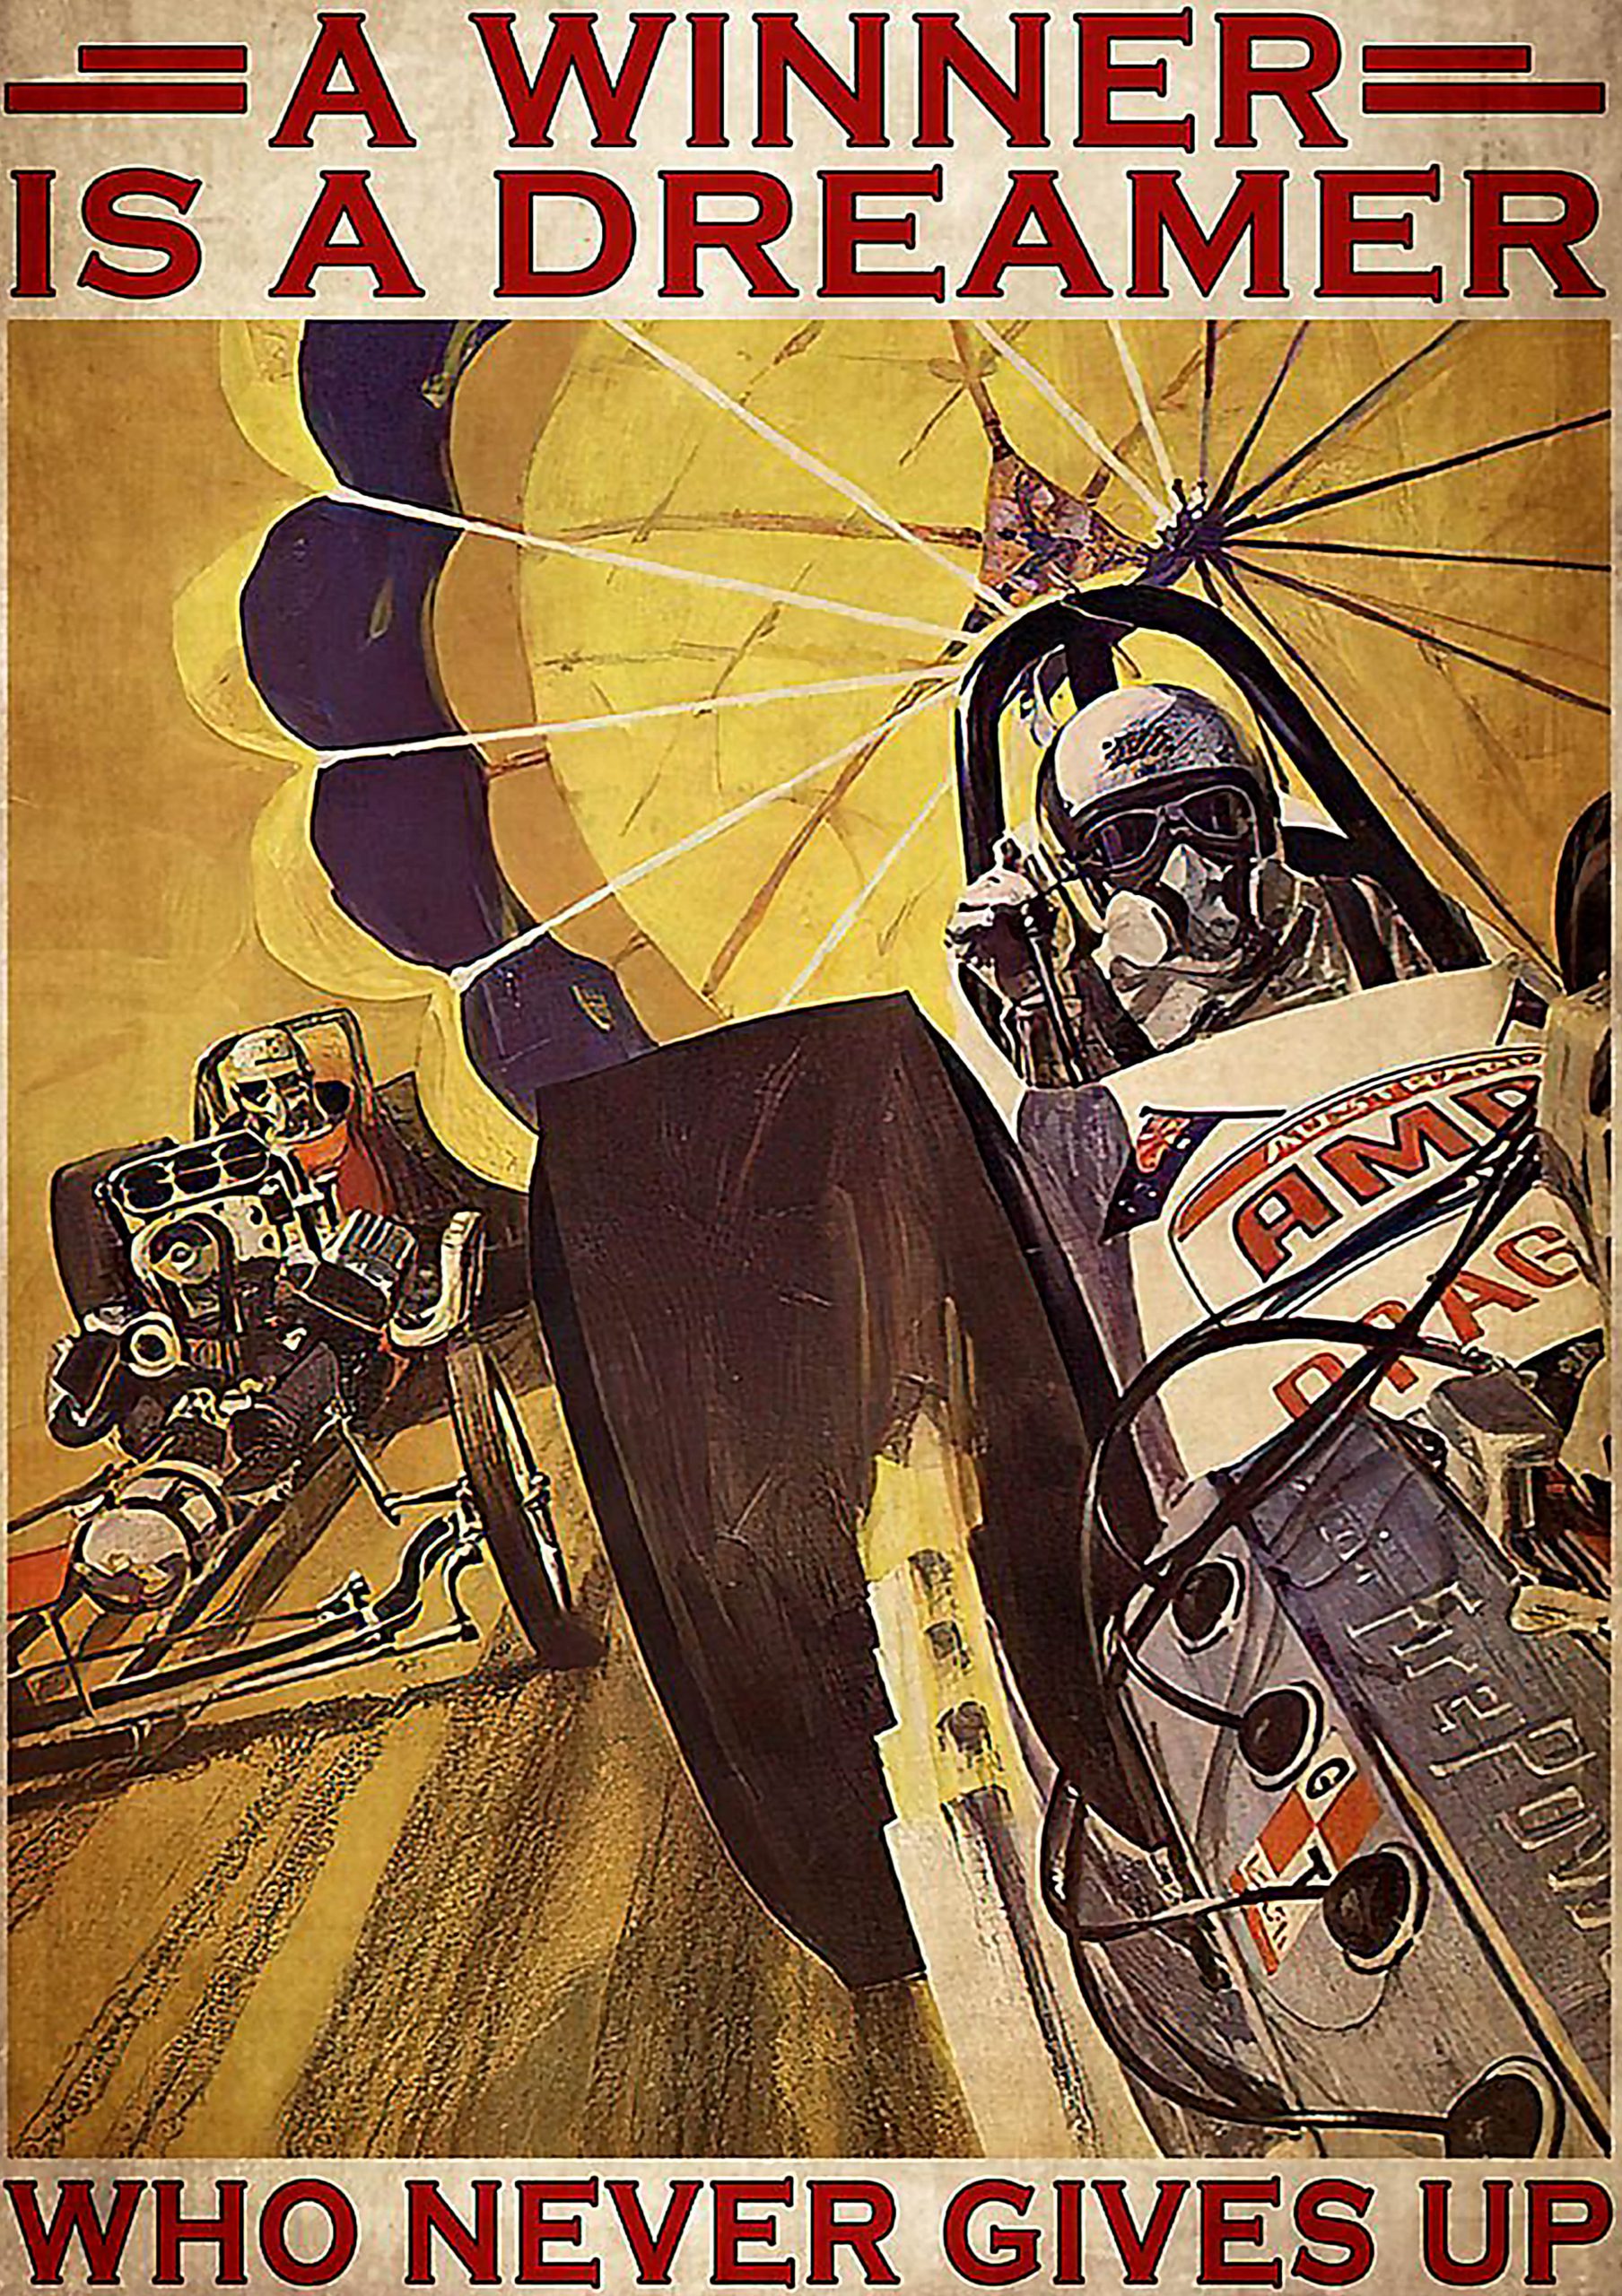 vintage drag racer a winner is a dreamer who never gives up poster 1 - Copy (3)